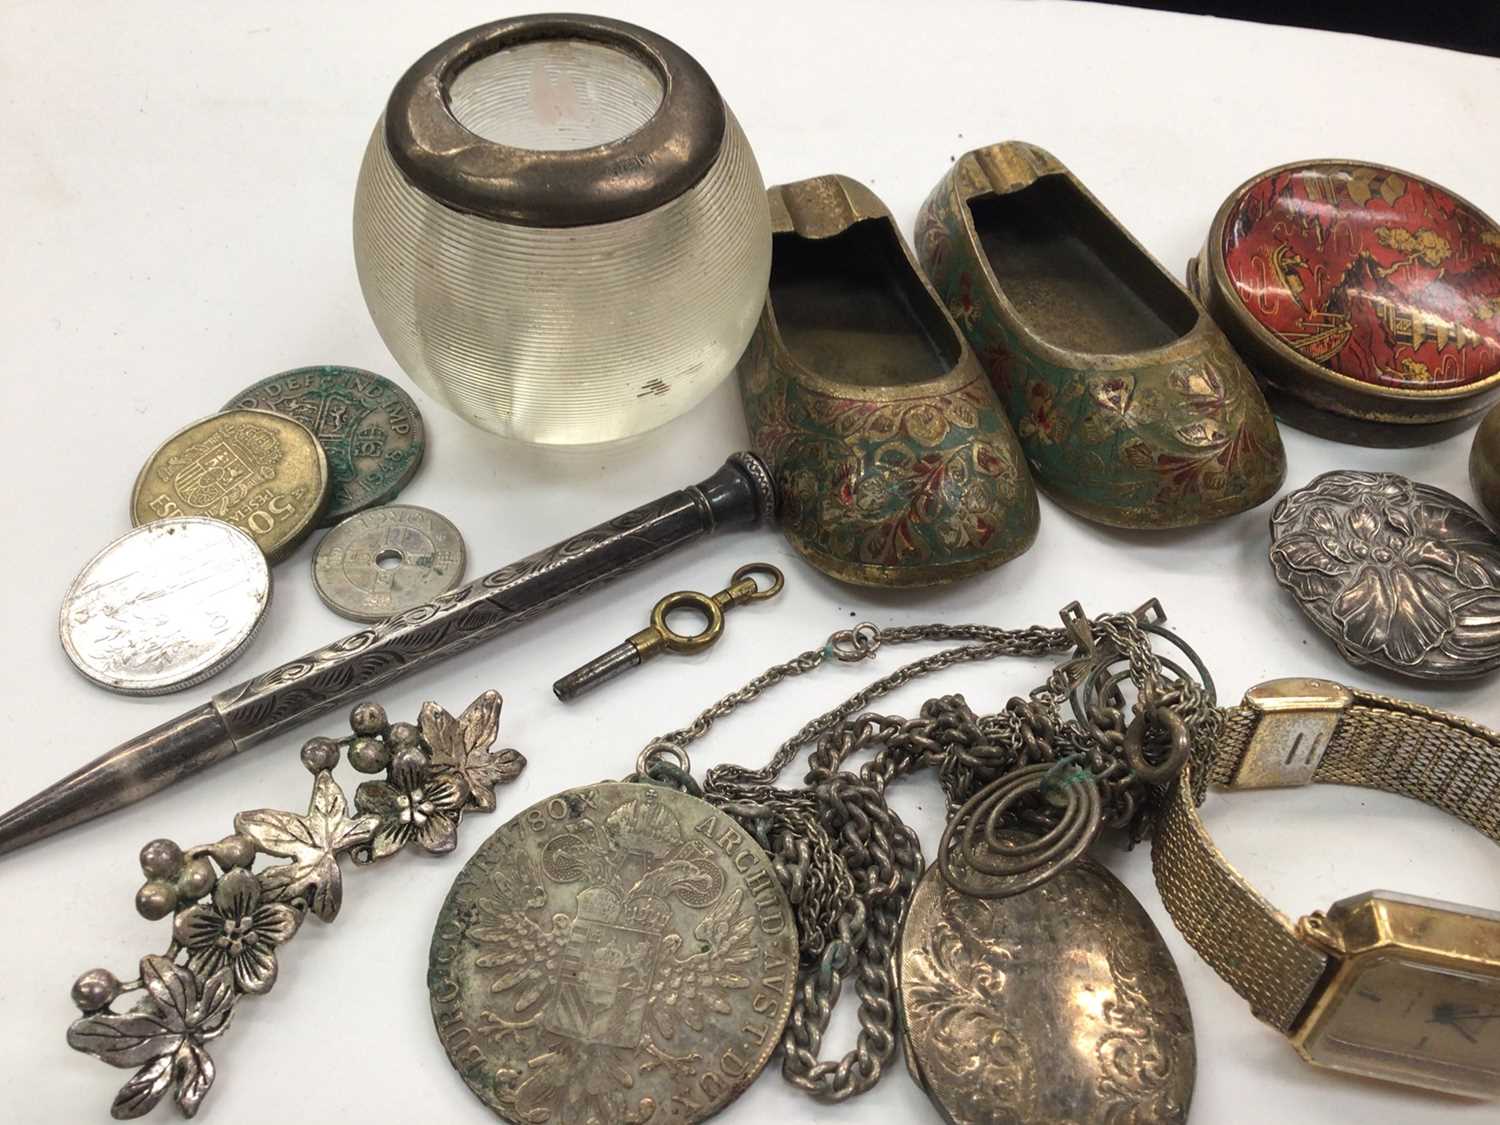 Antique Chinese silver buckle, silver pencil, silver mounted vesta globe and other items - Image 2 of 5